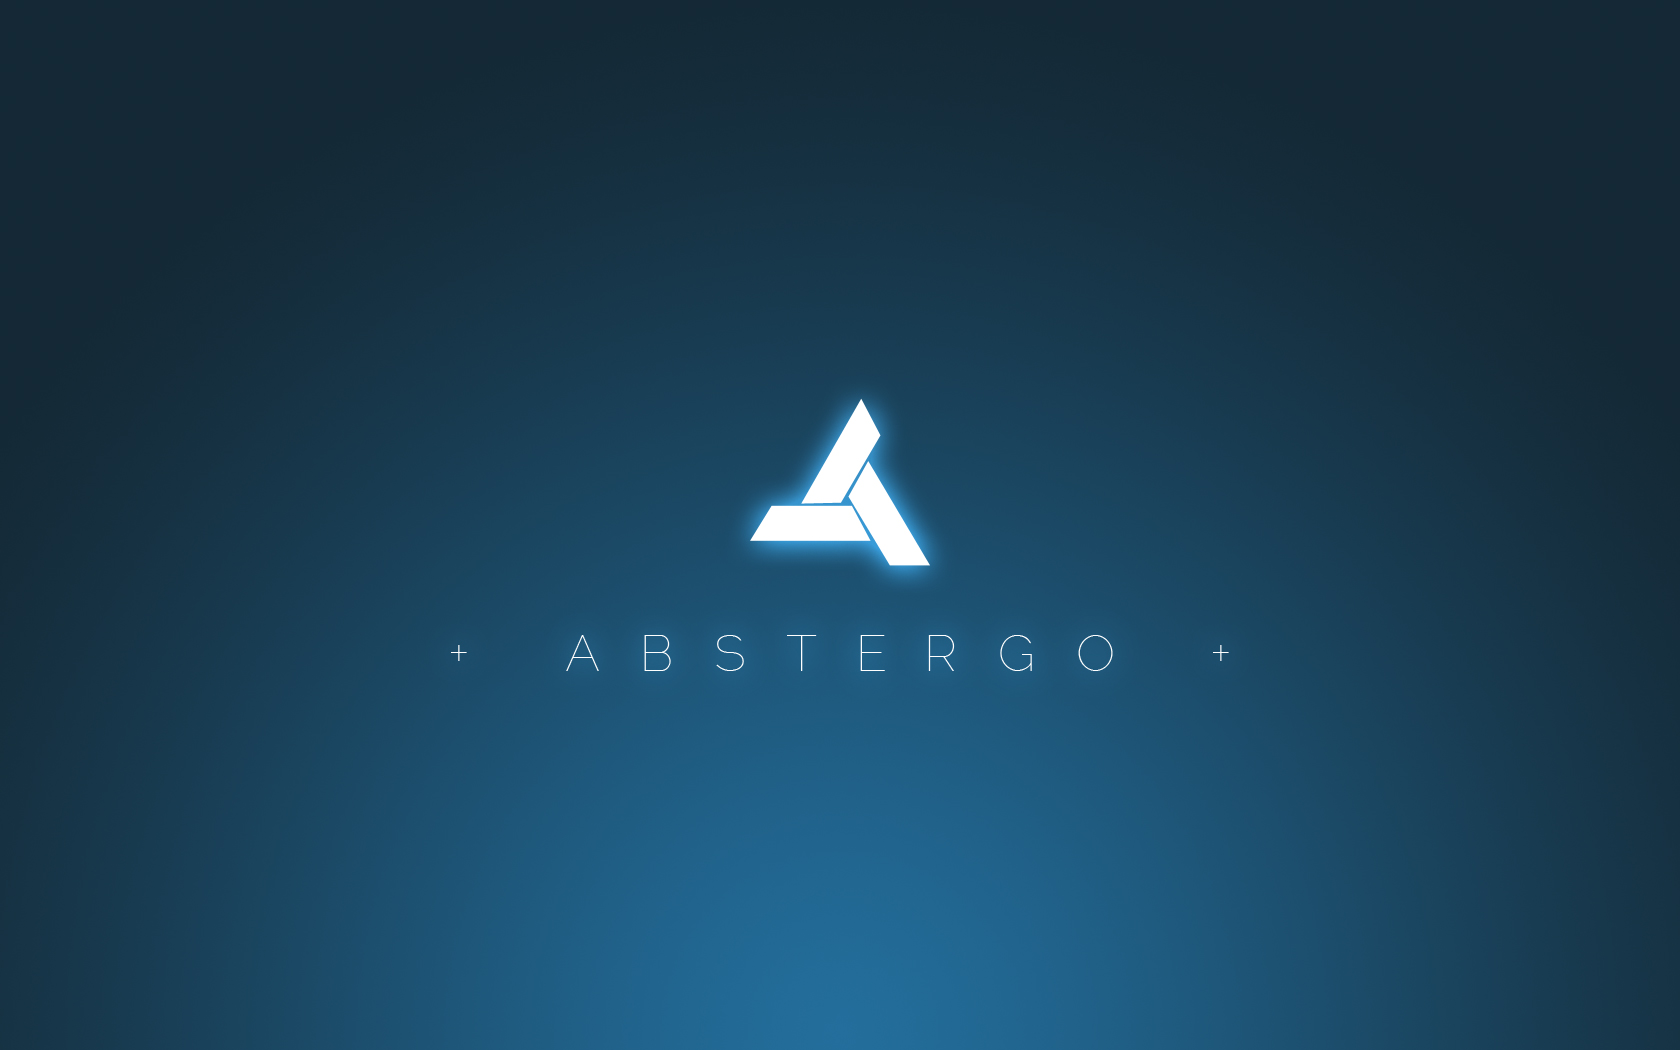 General 1680x1050 logo abstergo Assassin's Creed video games